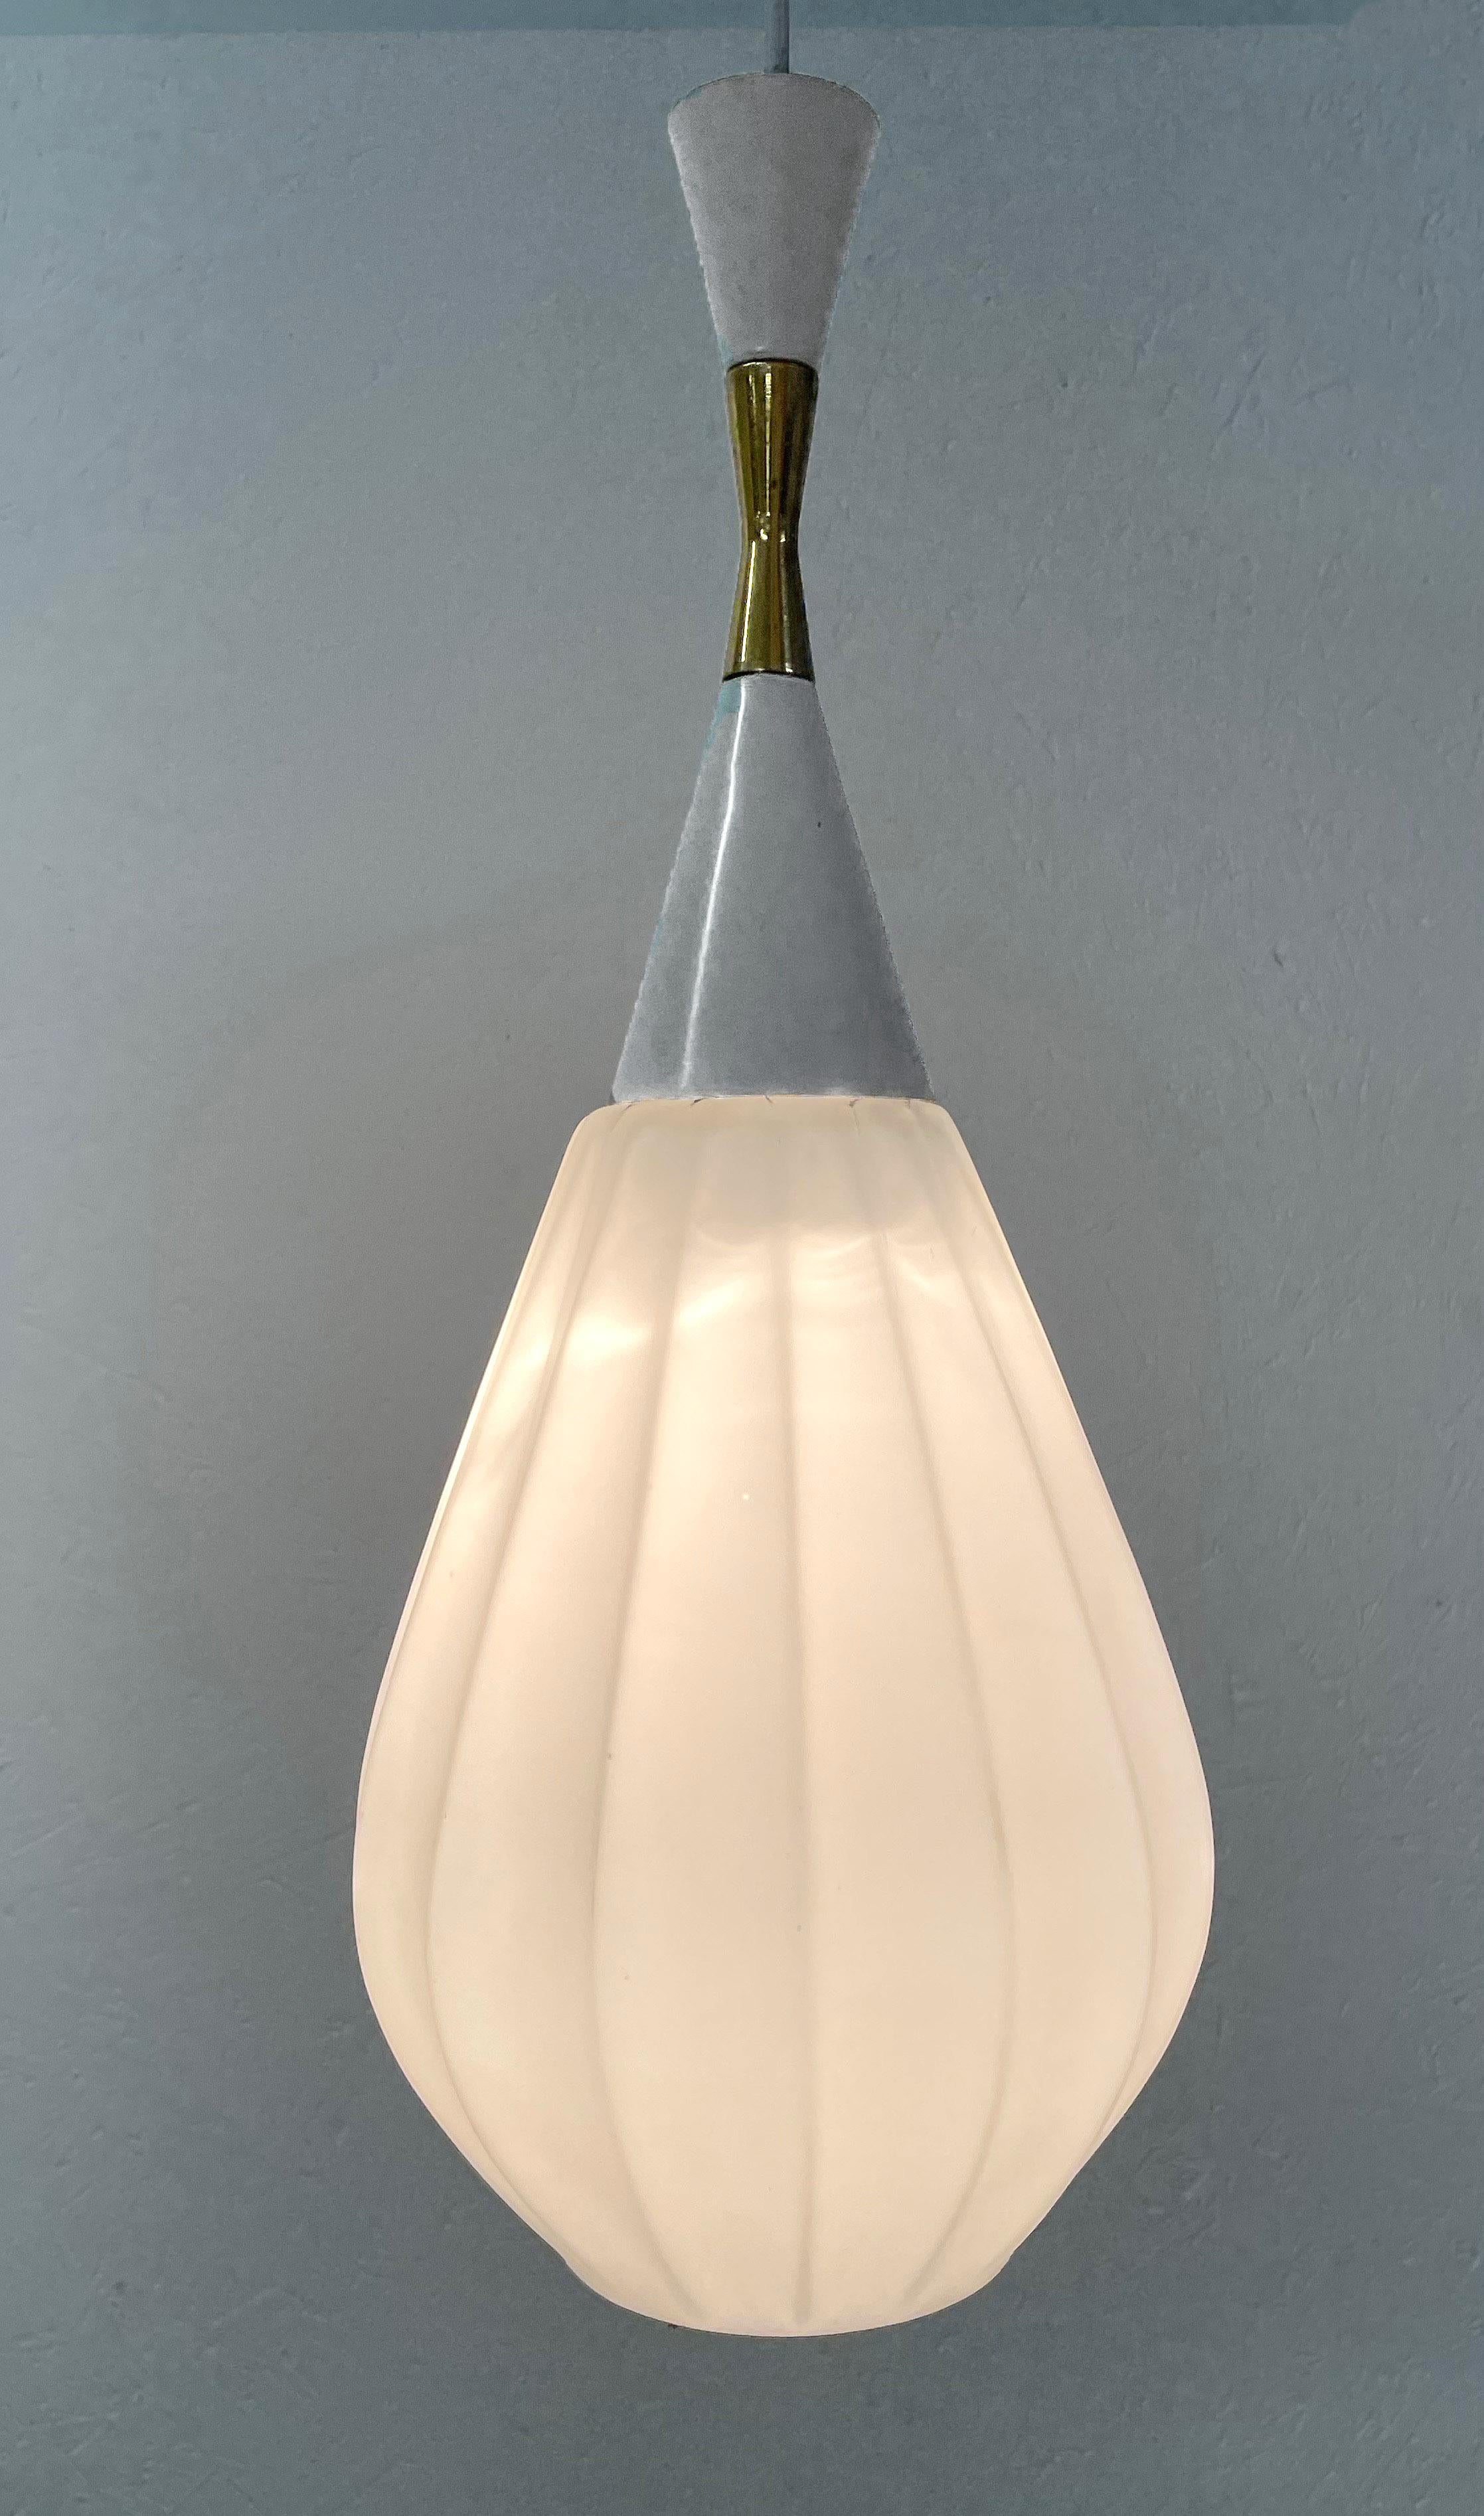 Superb midcentury pendant chandelier in white opaline glass and brass shaped like a wavy drop. This fantastic piece was designed in Italy in the 1950s. 

The lines are smooth and delicate and its elegance is due to the refined combination of the